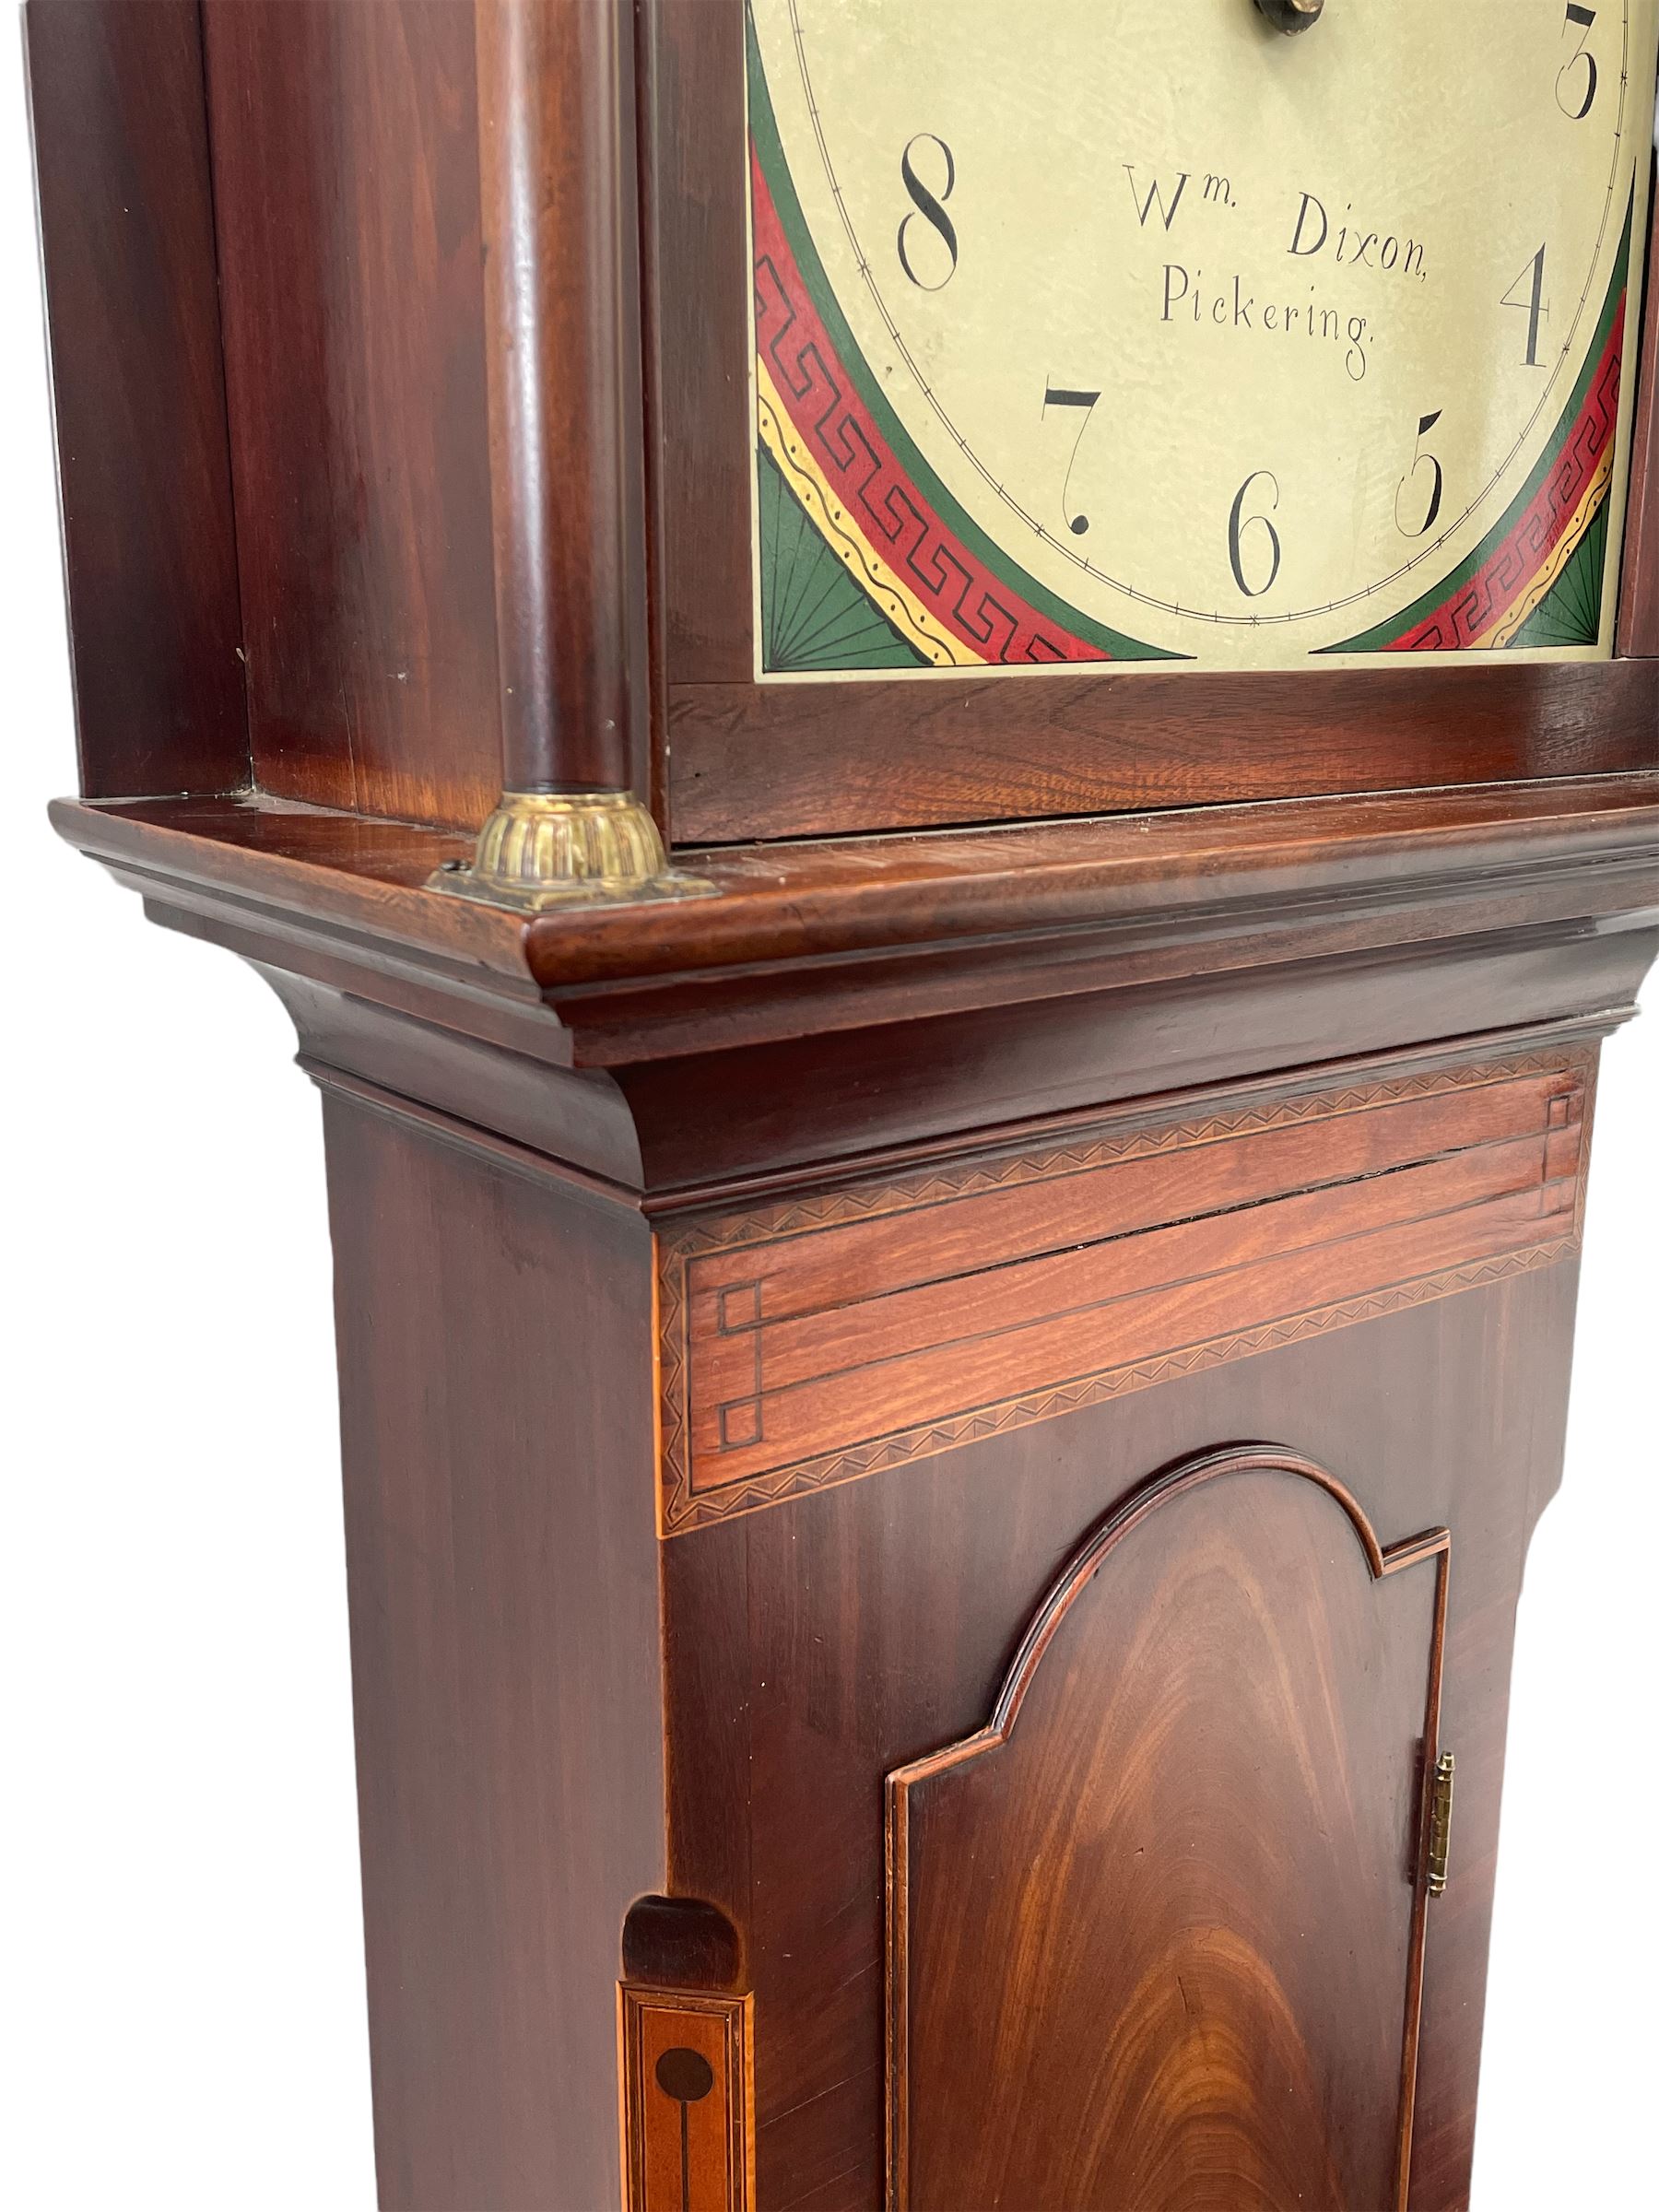 George IV mahogany longcase clock of small proportions by William Dixon of Pickering c1825 - Image 4 of 9